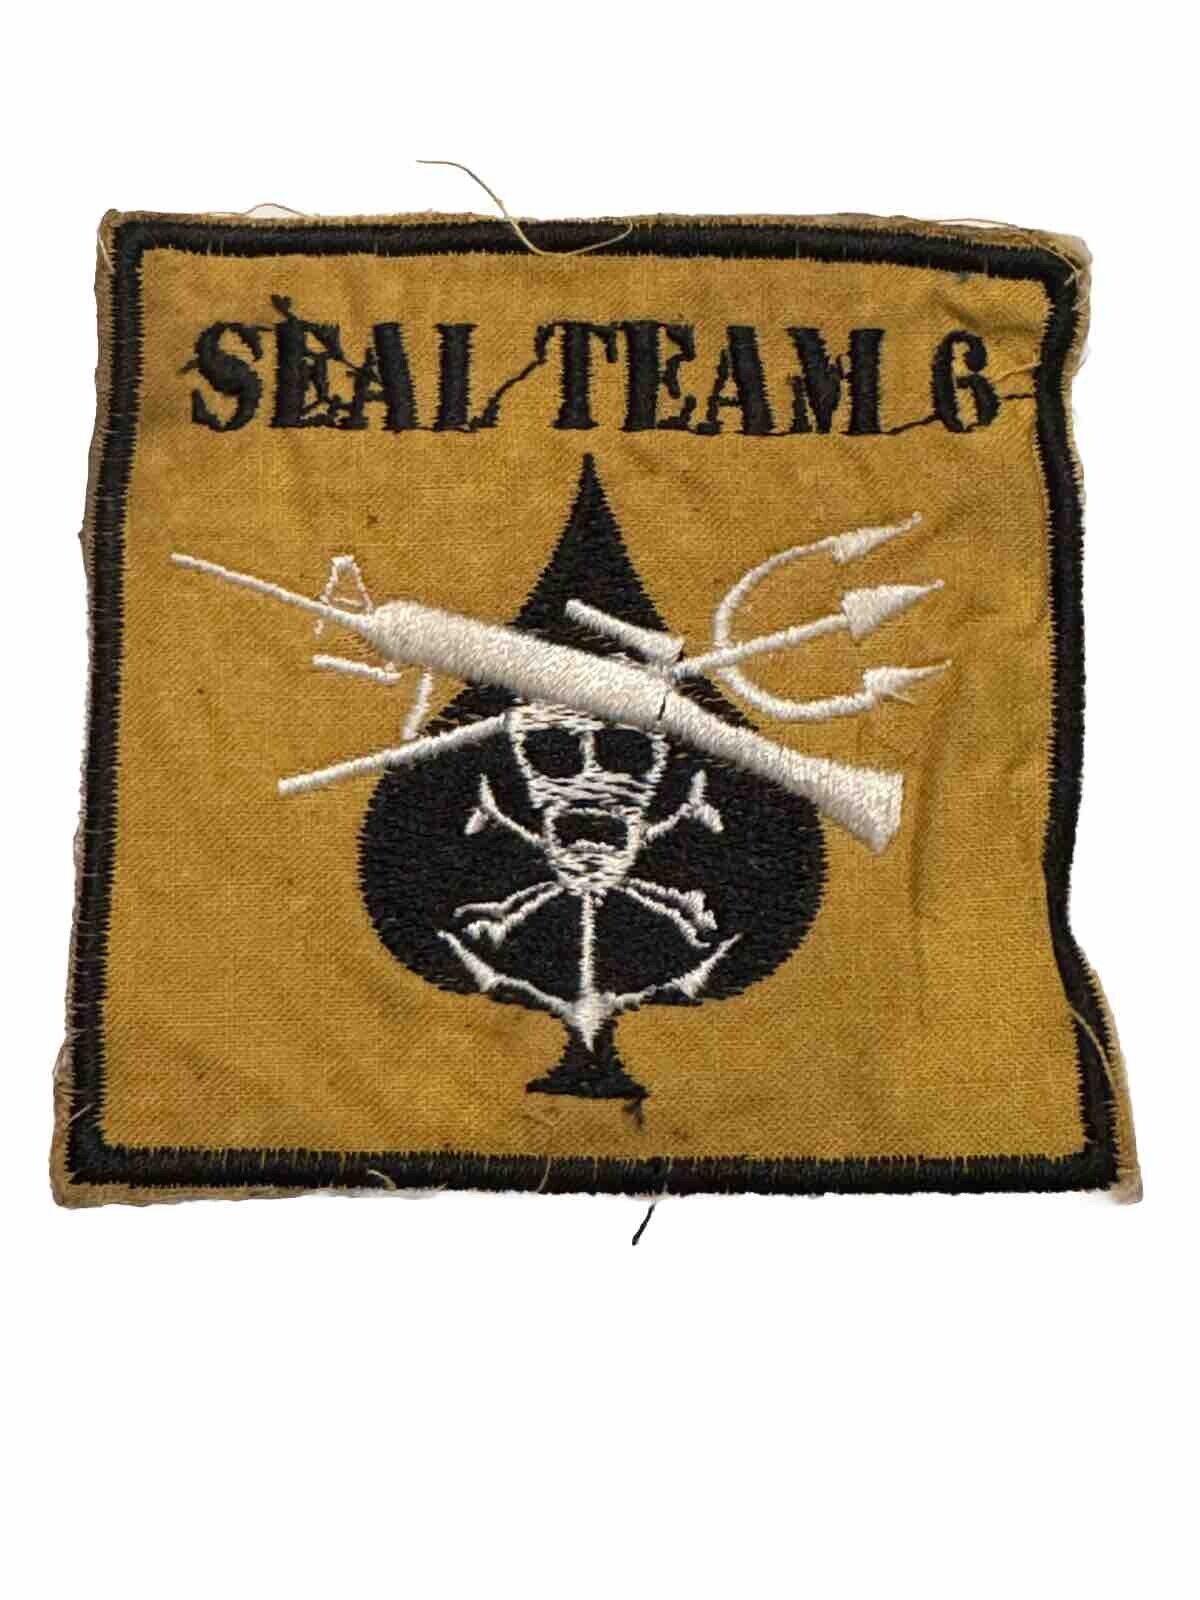 US Navy Patch Seal Team Six Airborne Diver Halo Scuba Black OPS Military Badge